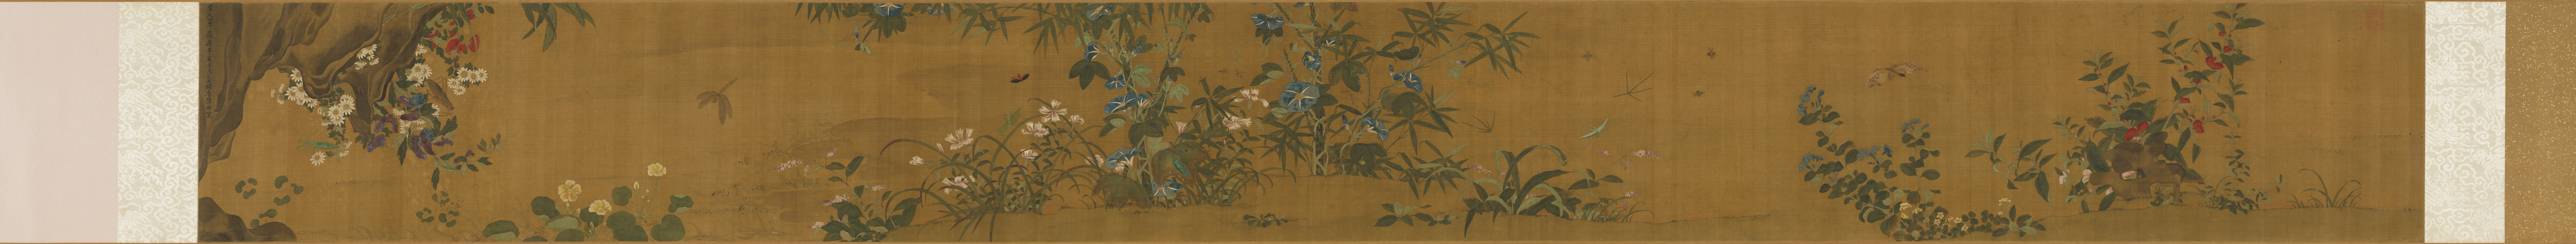 Biography of the Five Dynasties, Xu Xi, Flowers, Insects